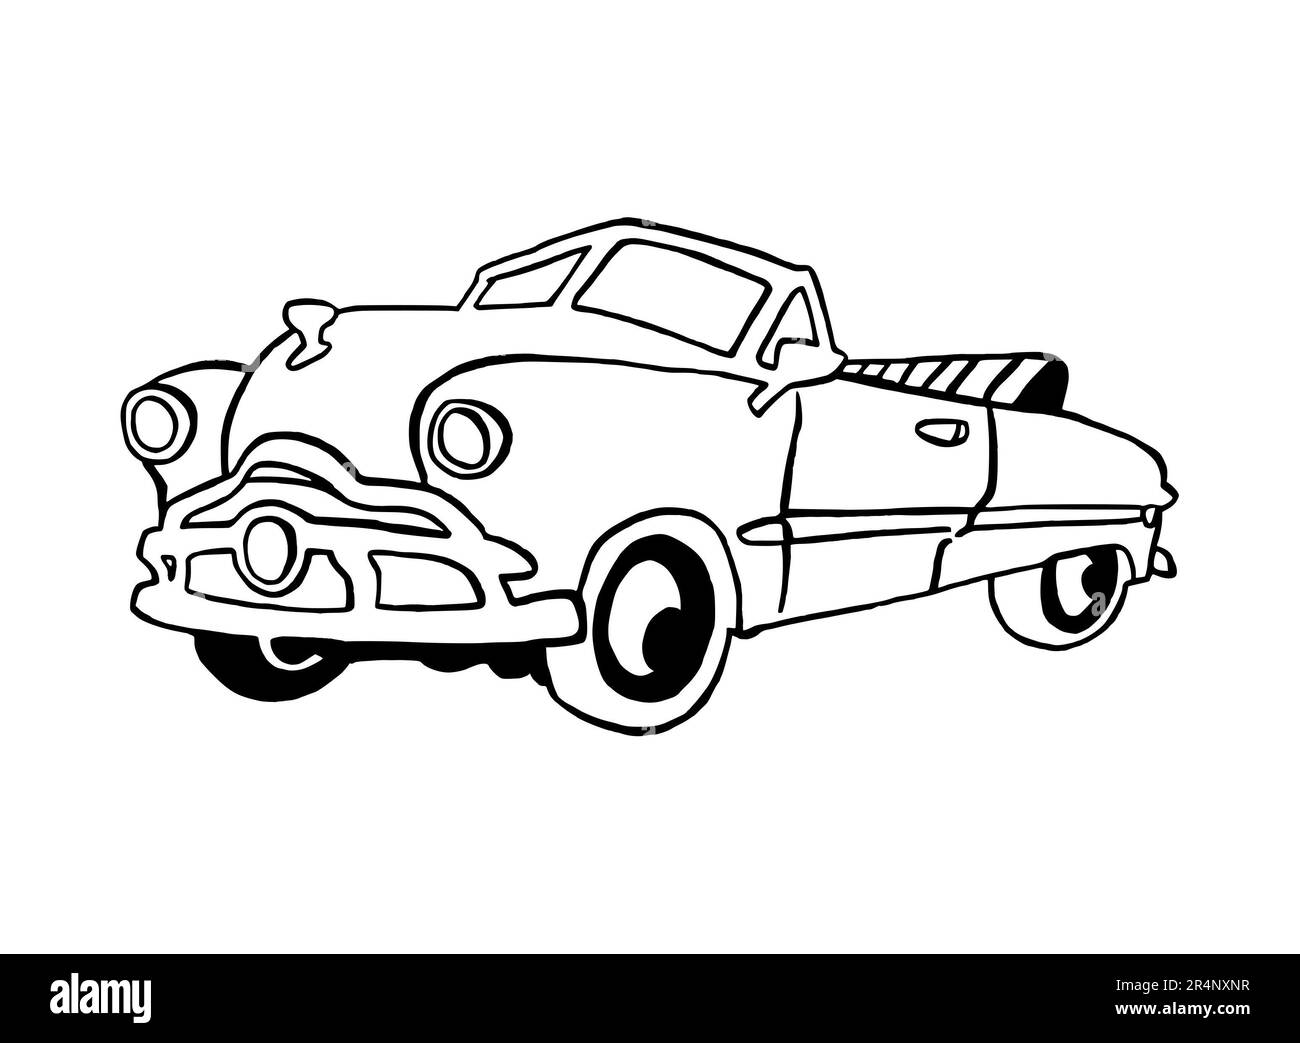 Hand drawn Illustration of a Retro Convertible Car, American, Full sized, isolated on a white background, with black line art Stock Photo